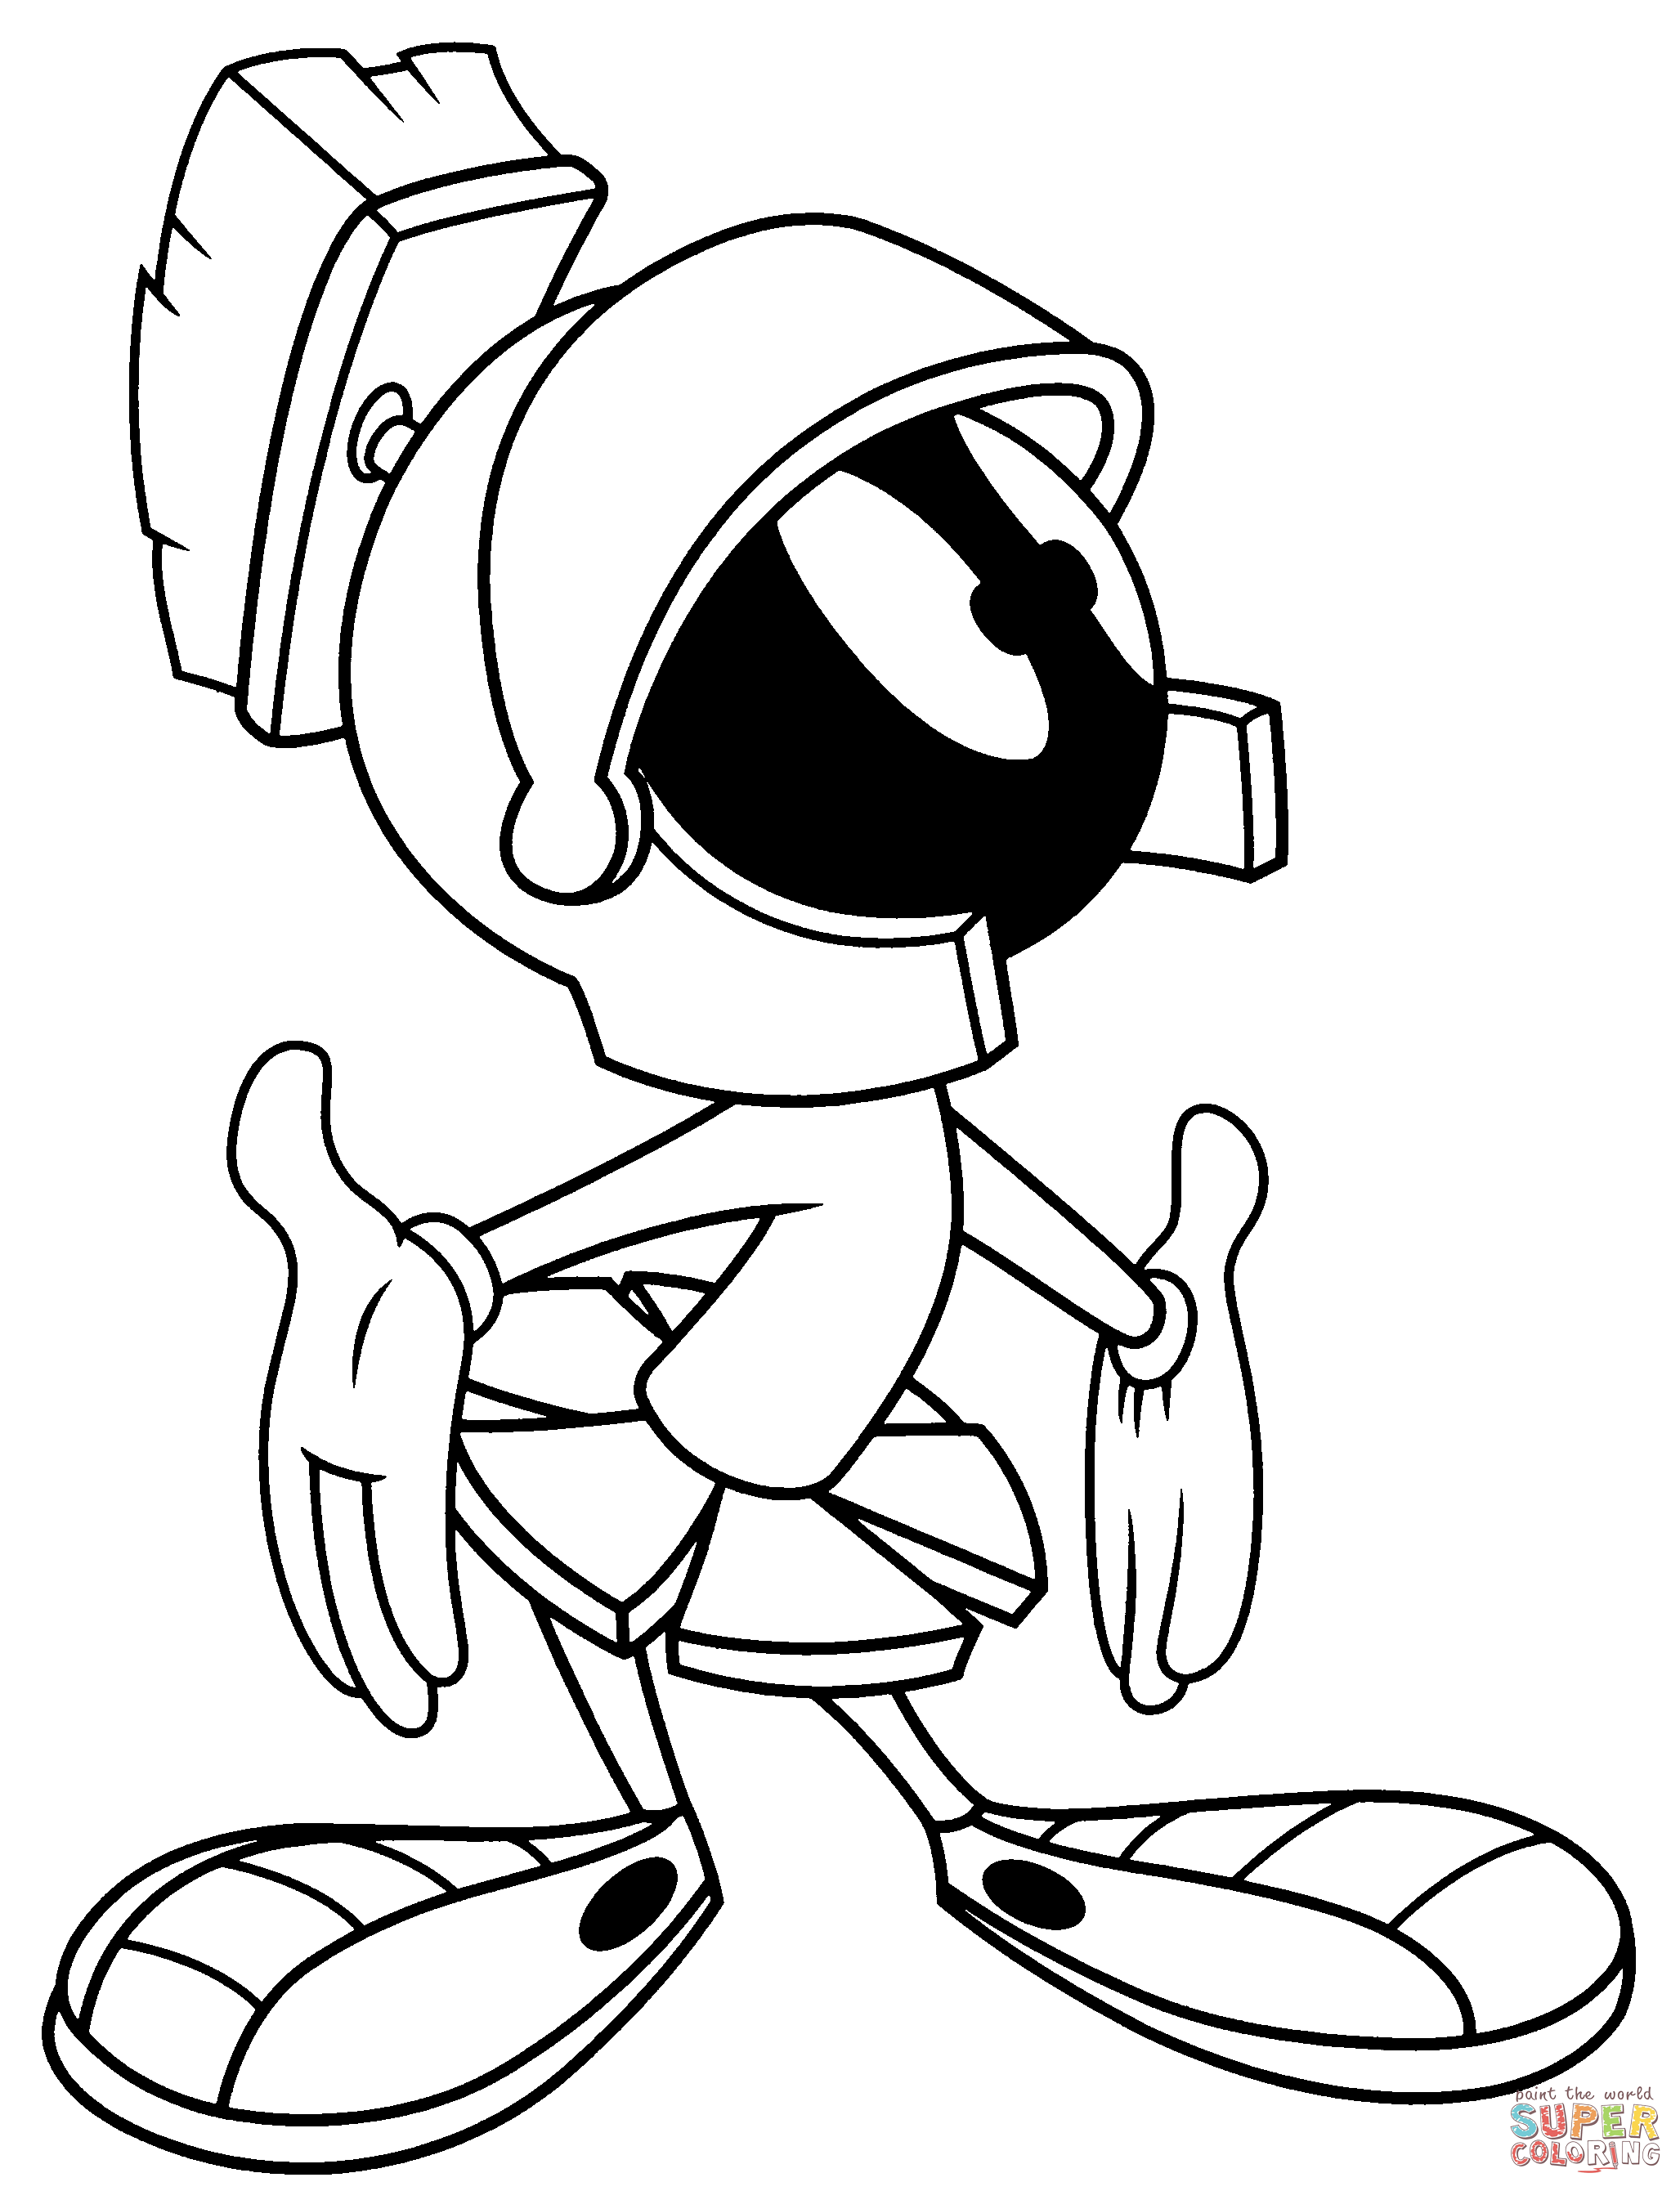 Marvin the martian clipart silhouette